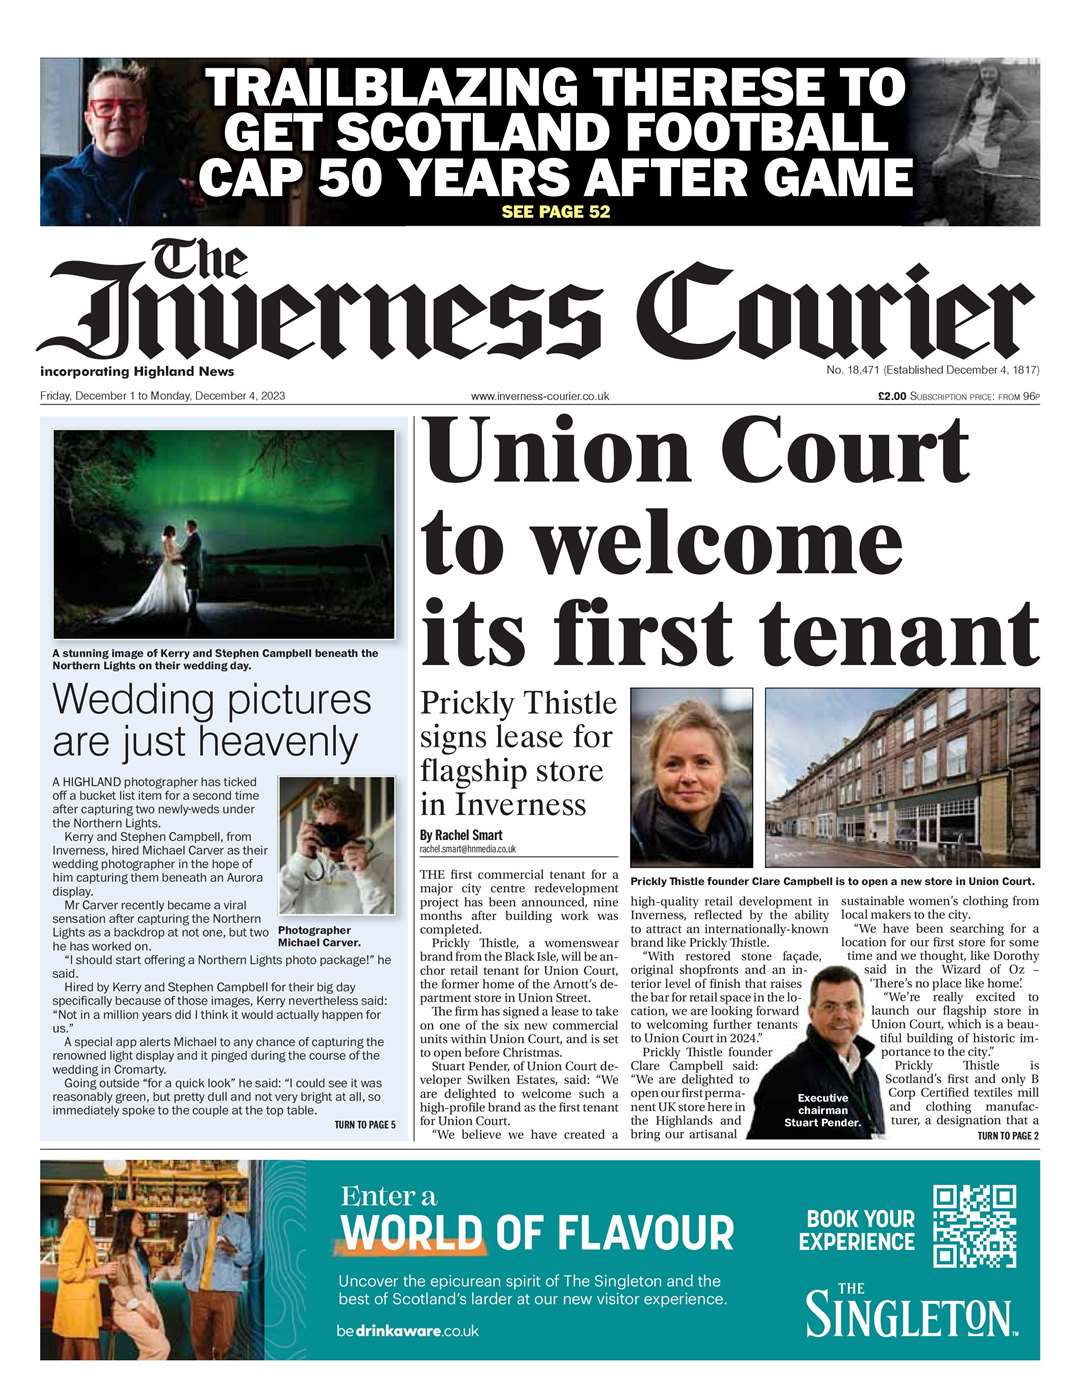 The Inverness Courier, December 1, front page.